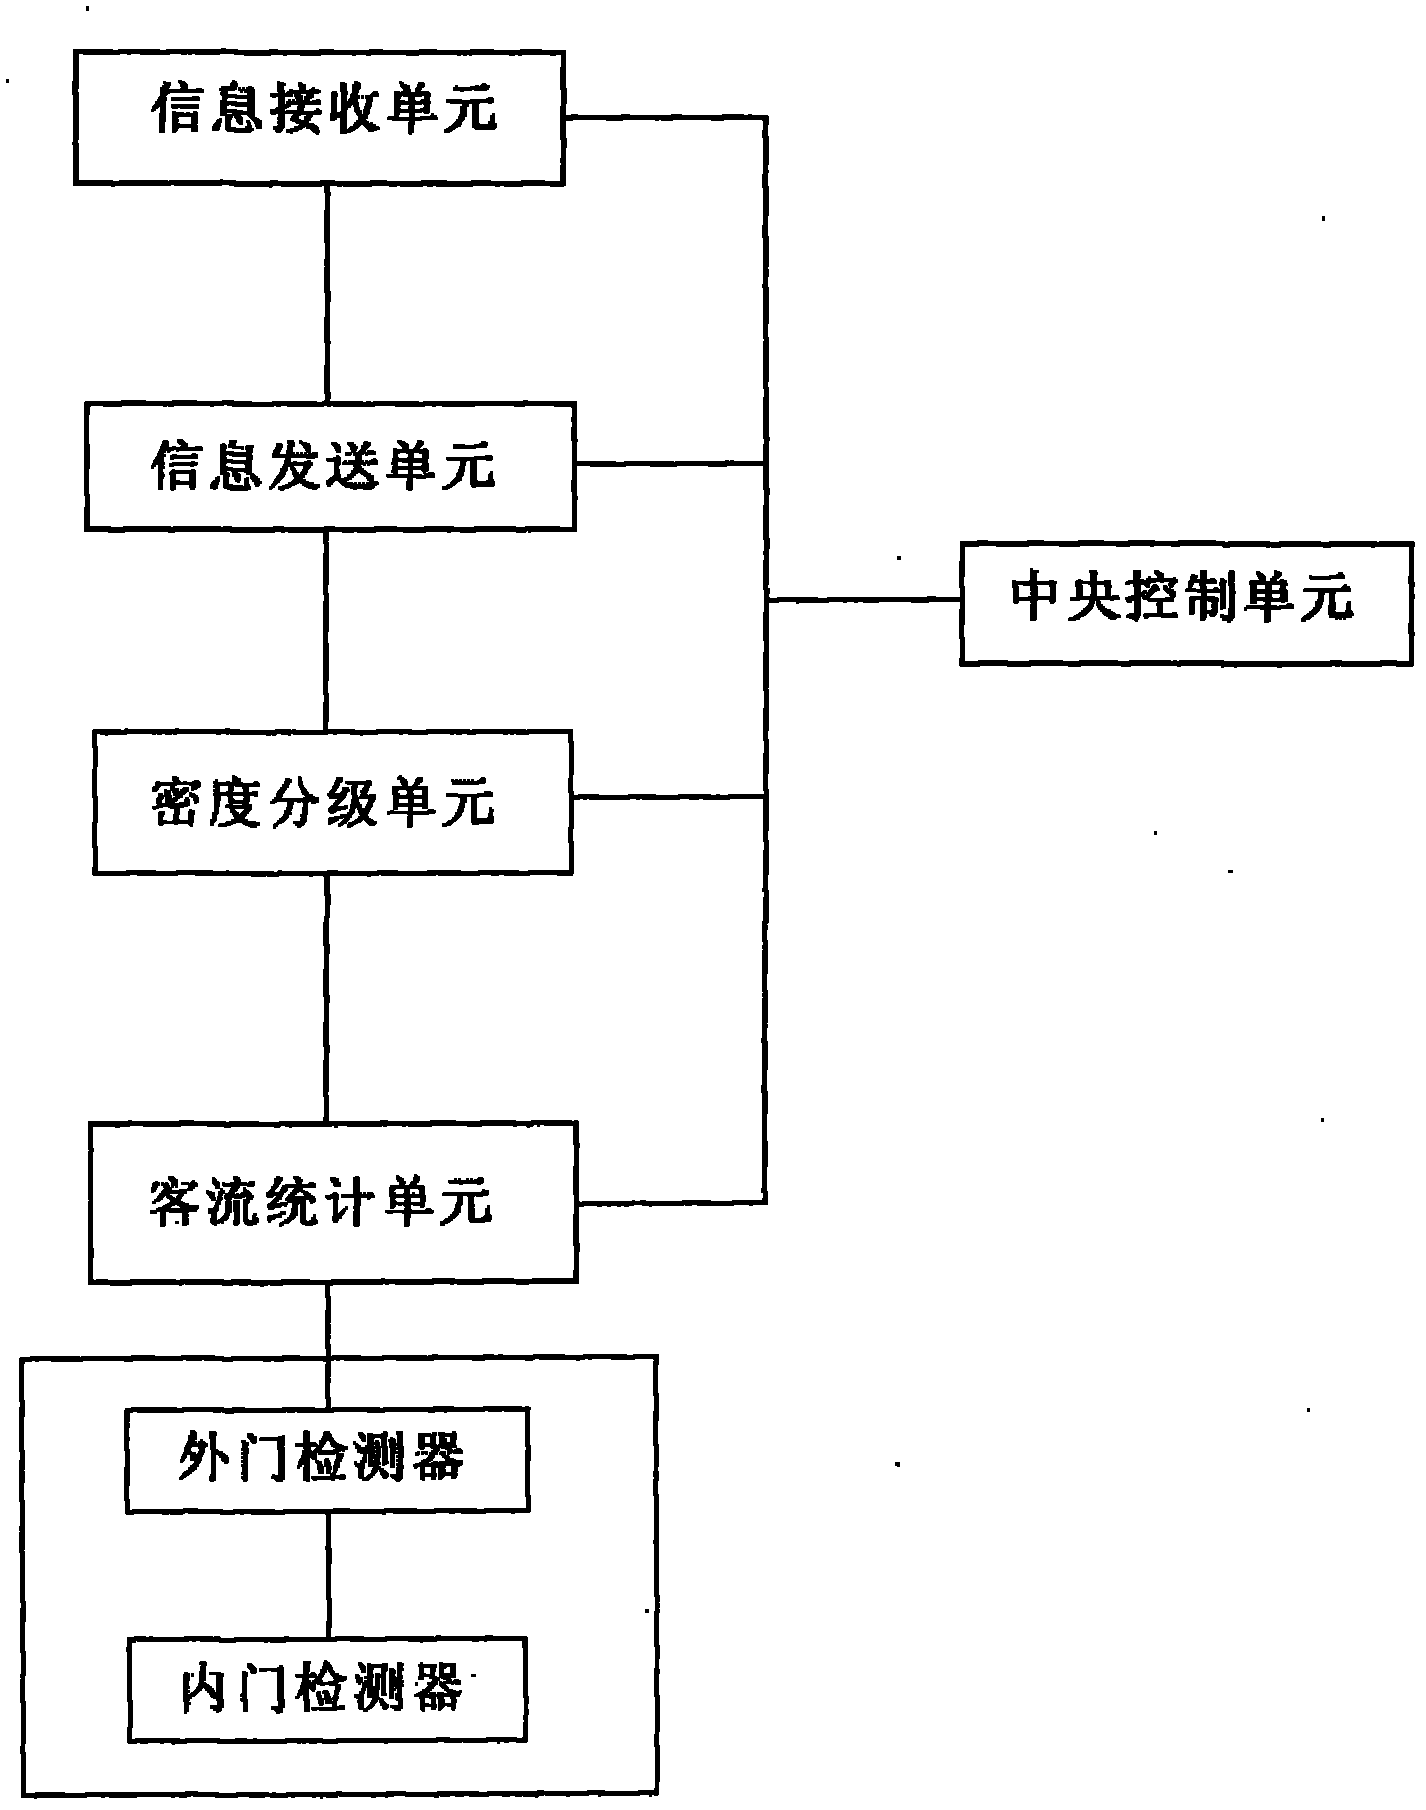 Subway passenger conducting management control system and method thereof